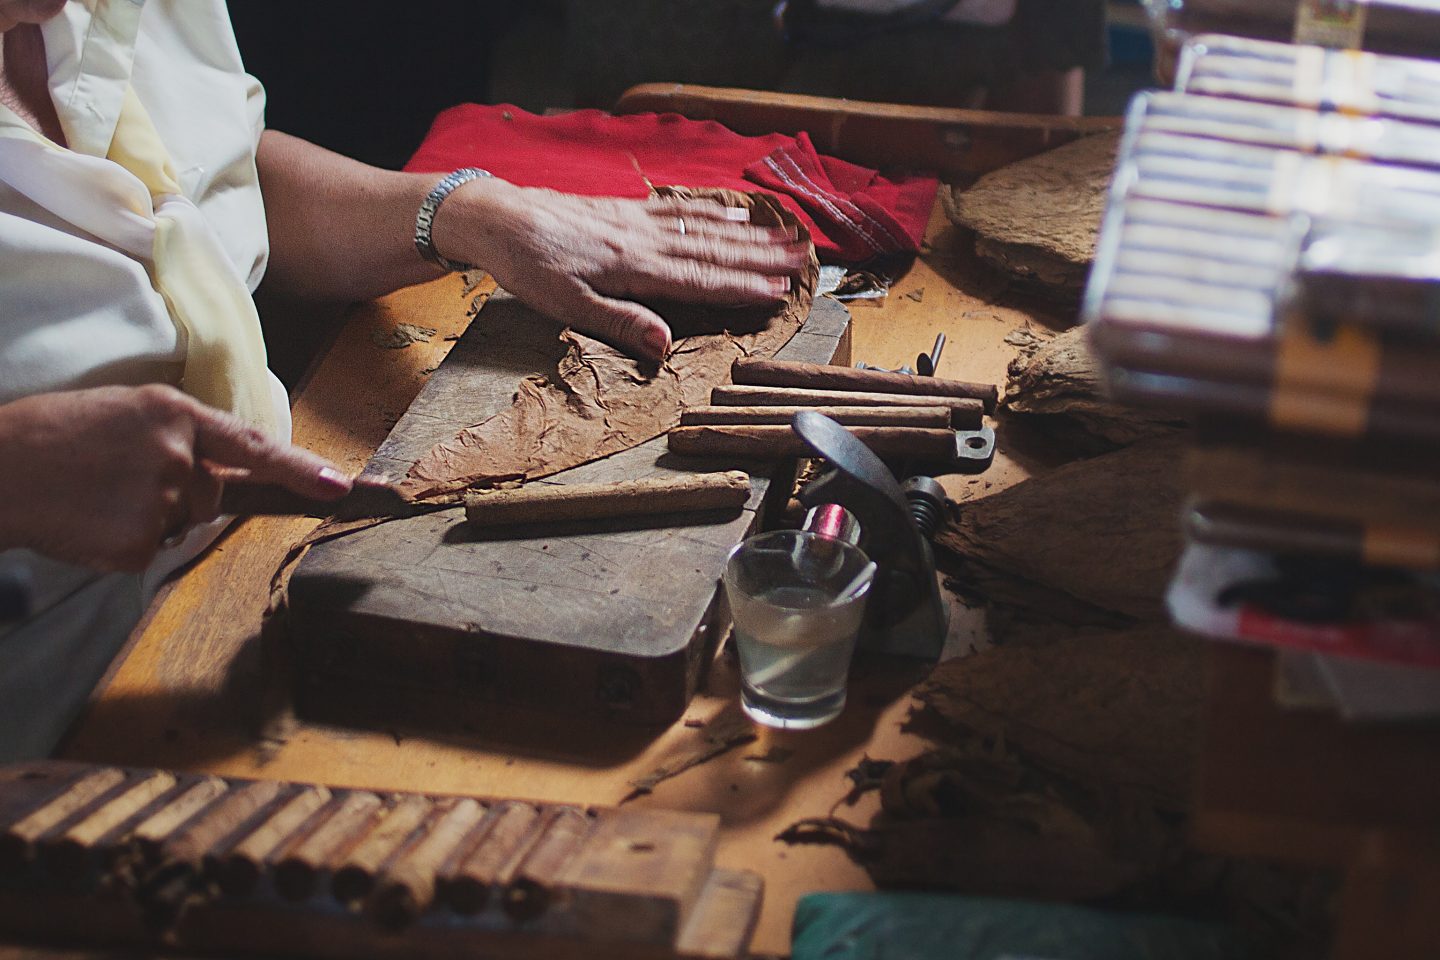 Travel through Cuba to understand the global obsession with the Cuban cigar